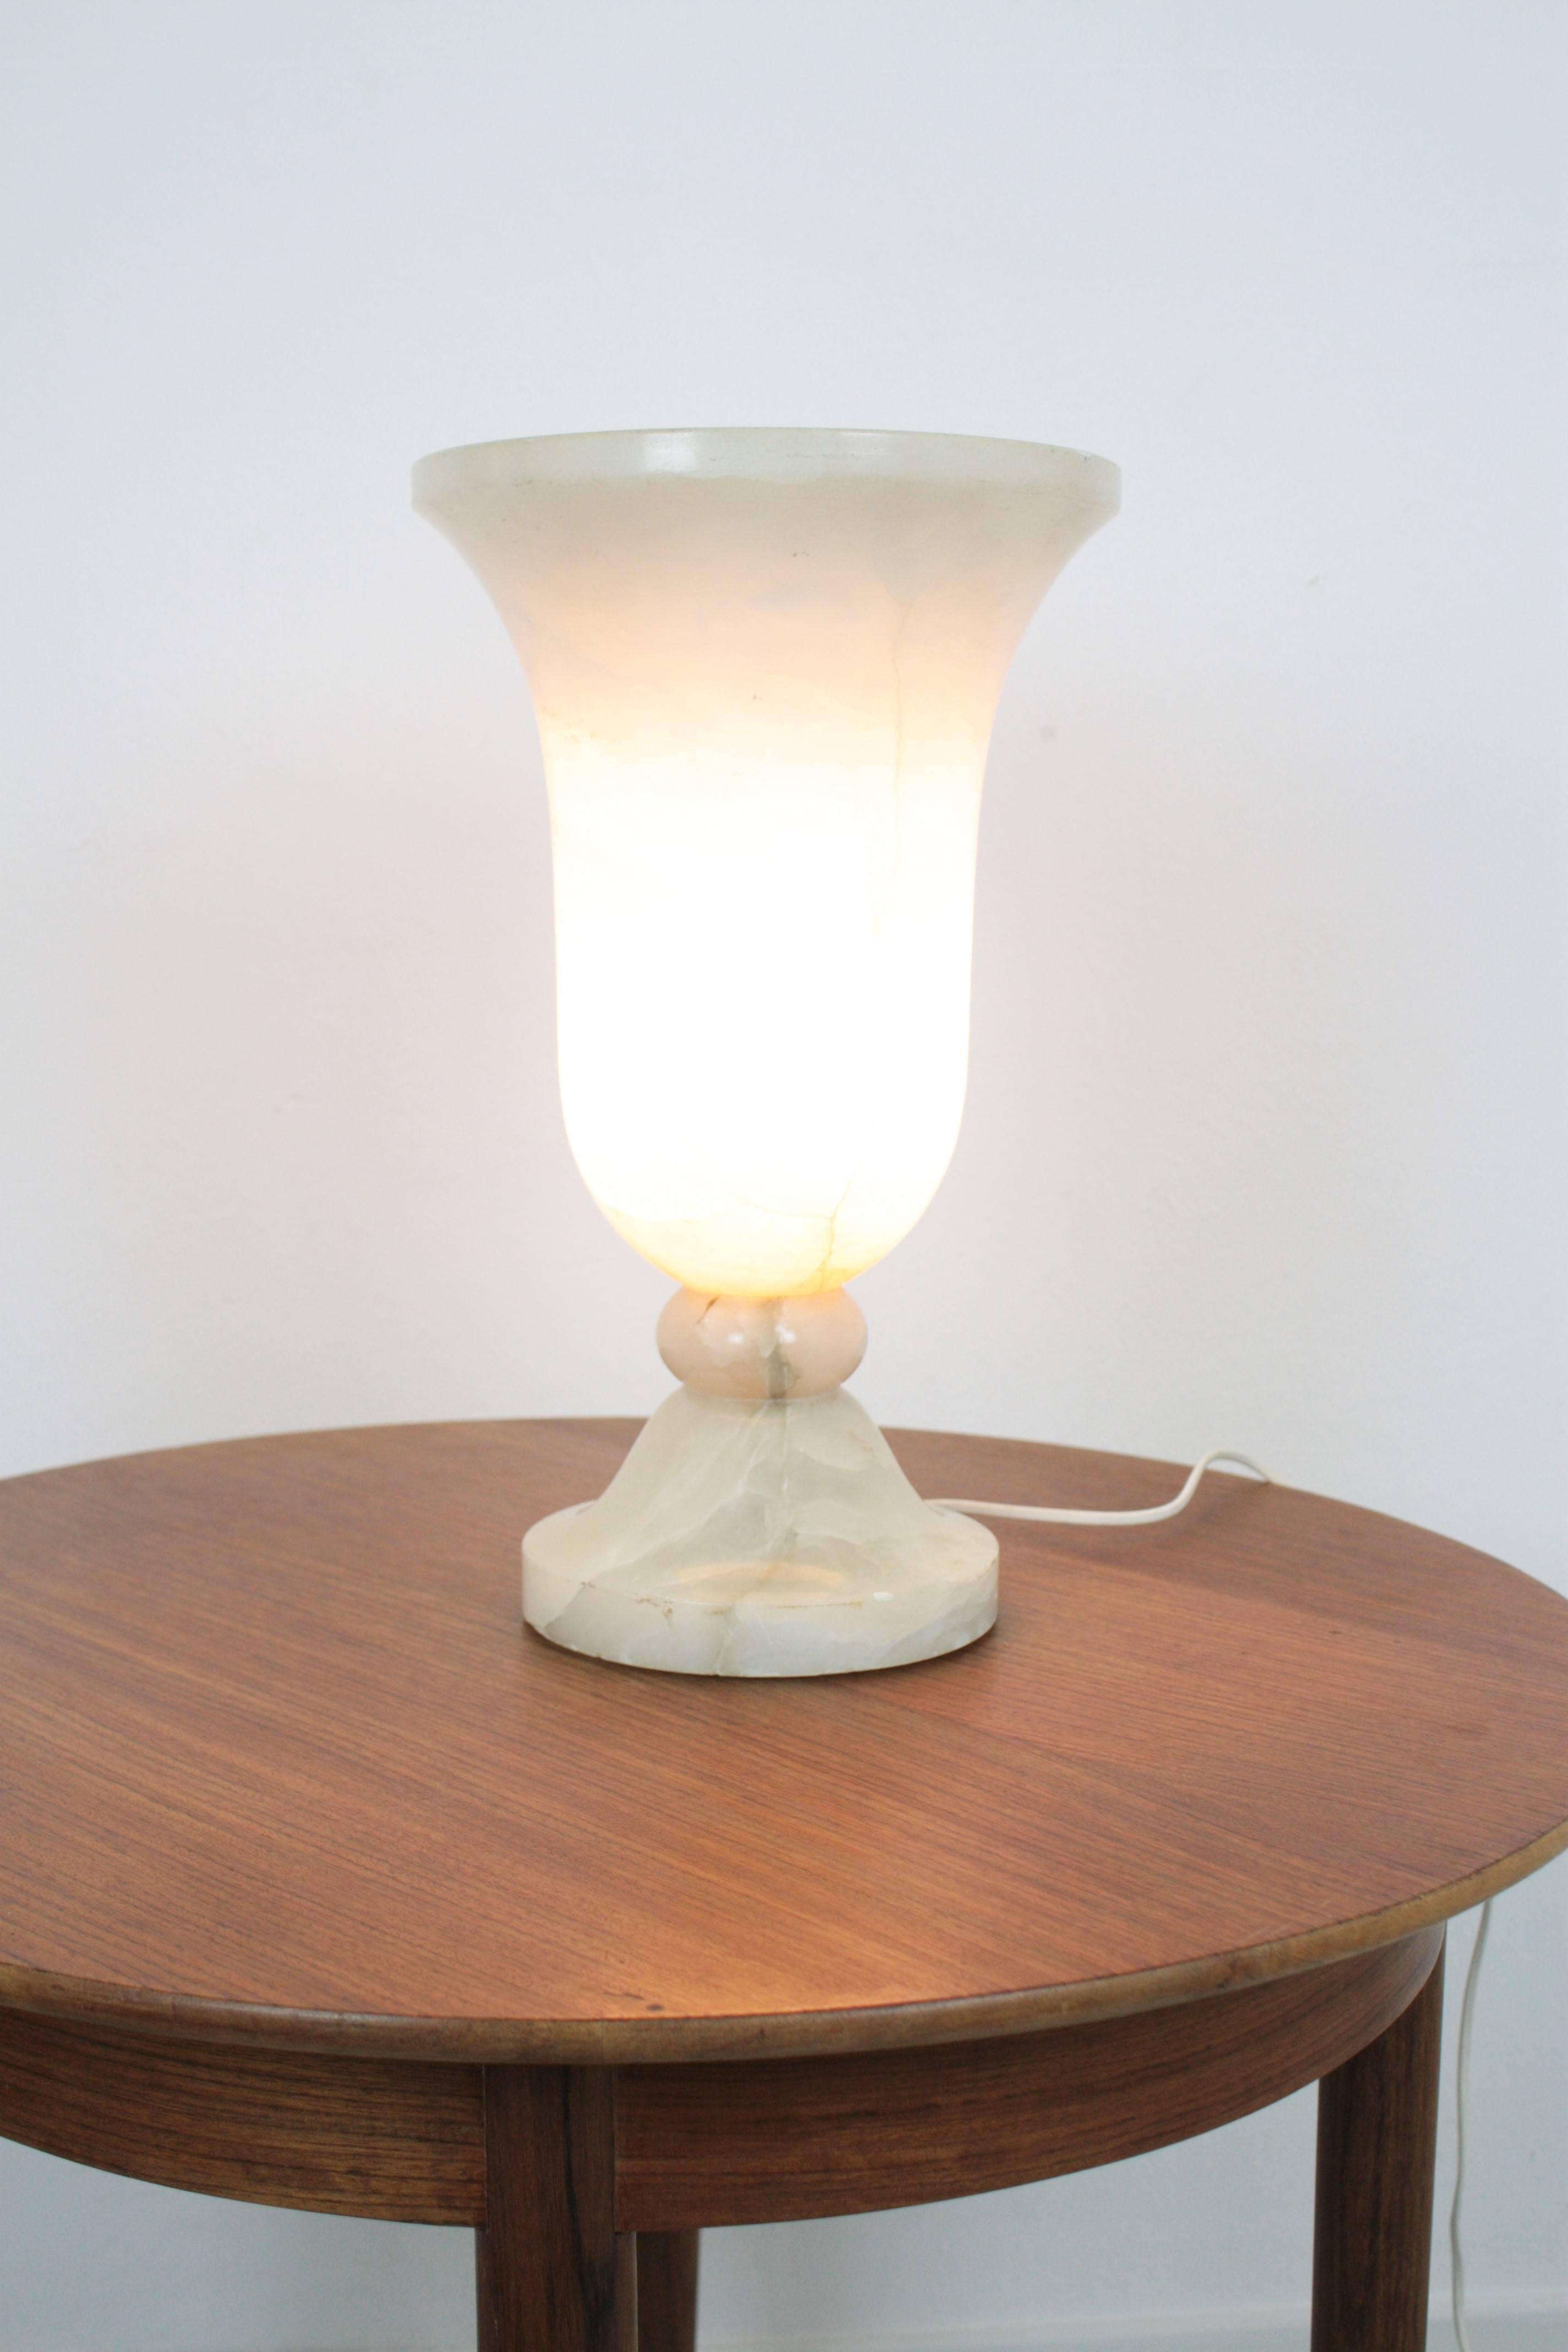 A large Art Deco alabaster urn lamp in excellent condition. Elegant and classical design and highly decorative effect when lit,
Spain, 1930s.

Please check our storefront to see more lamps in this manner.